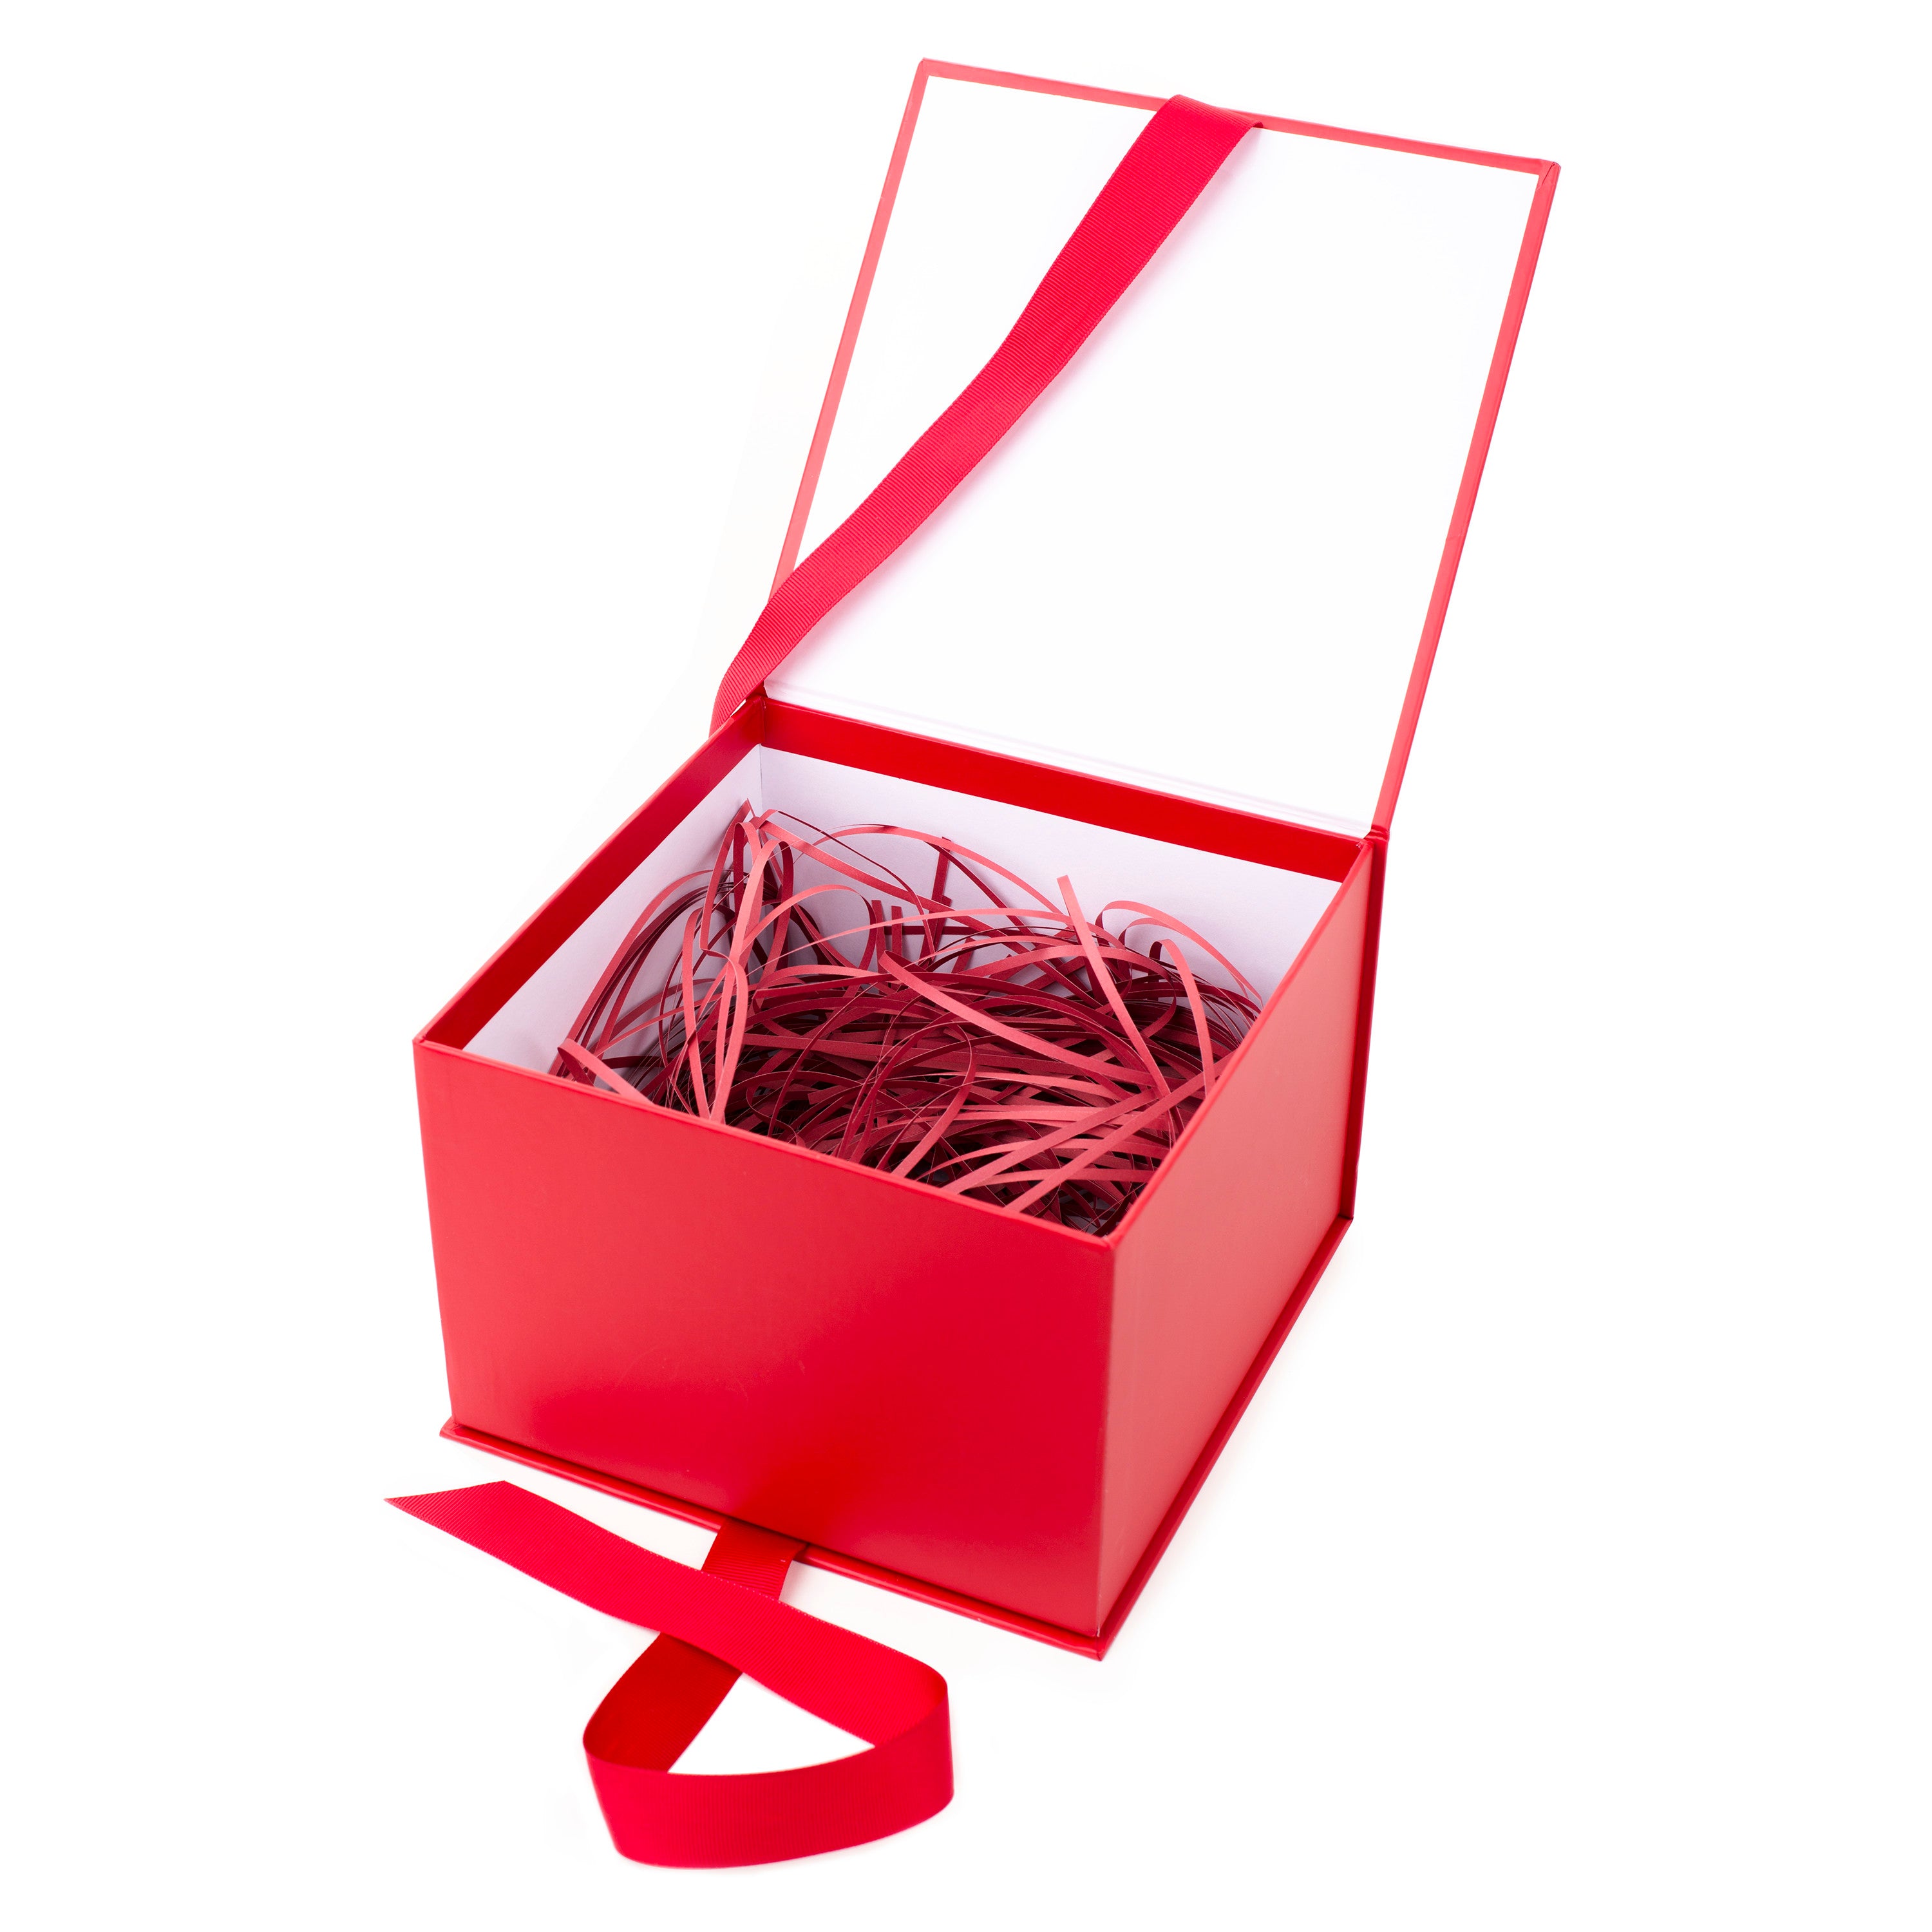 Hallmark 7" Large Gift Box with Fill (Red) for Birthdays, Christmas, Bridal Showers, Weddings, Baby Showers and More